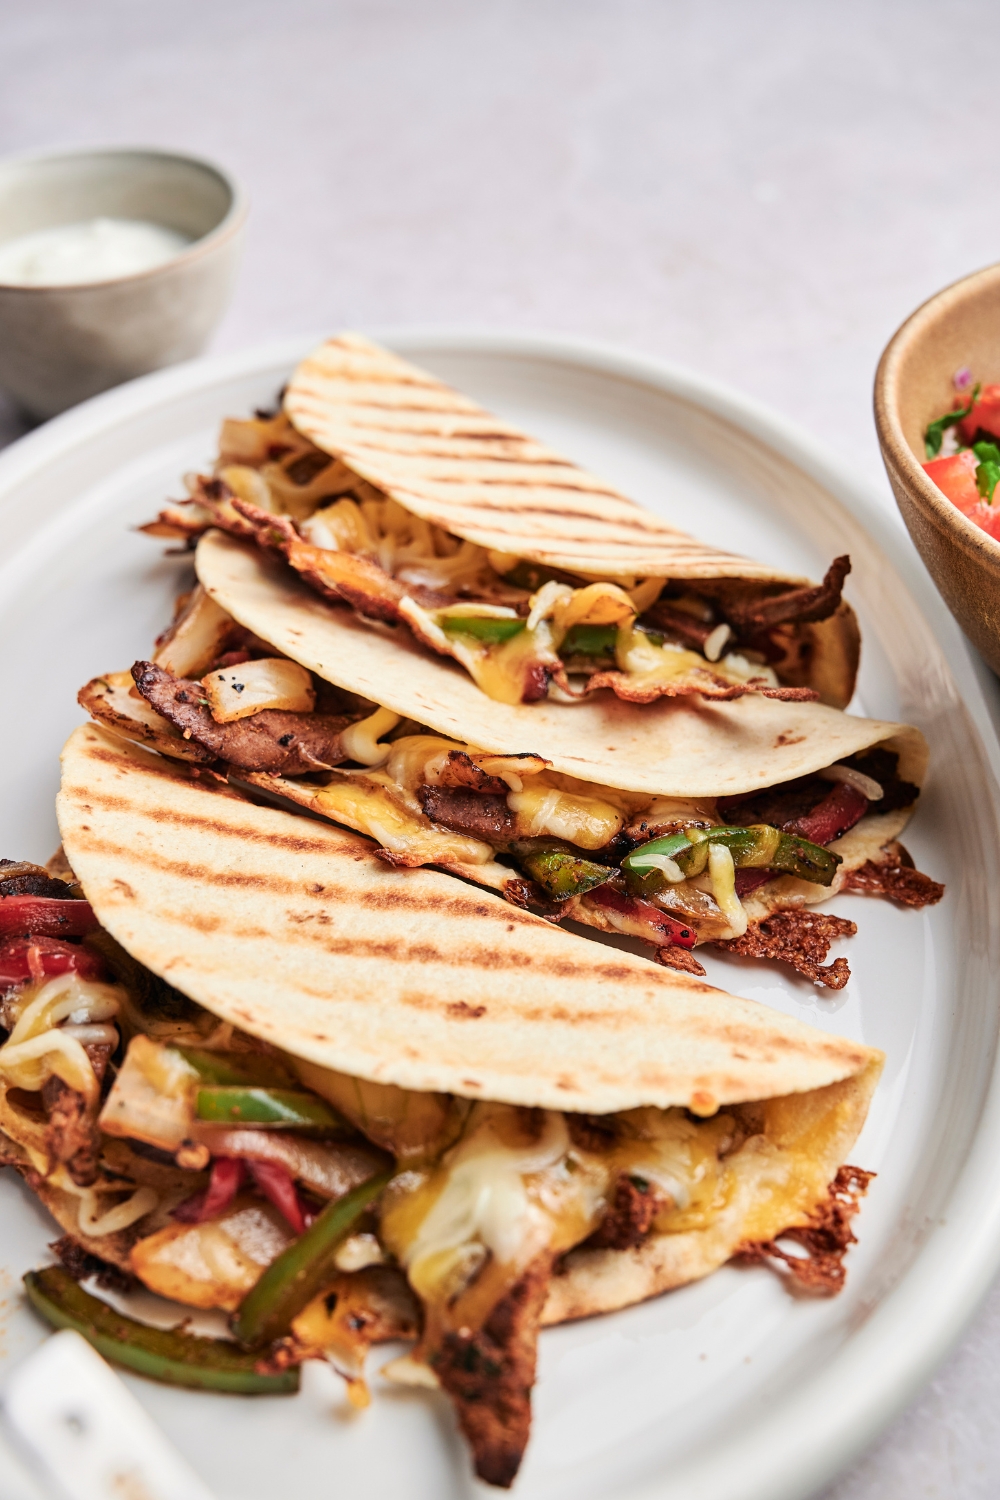 Three steak quesadillas are on a white serving platter. The quesadillas are stuffed full with steak and vegetables.